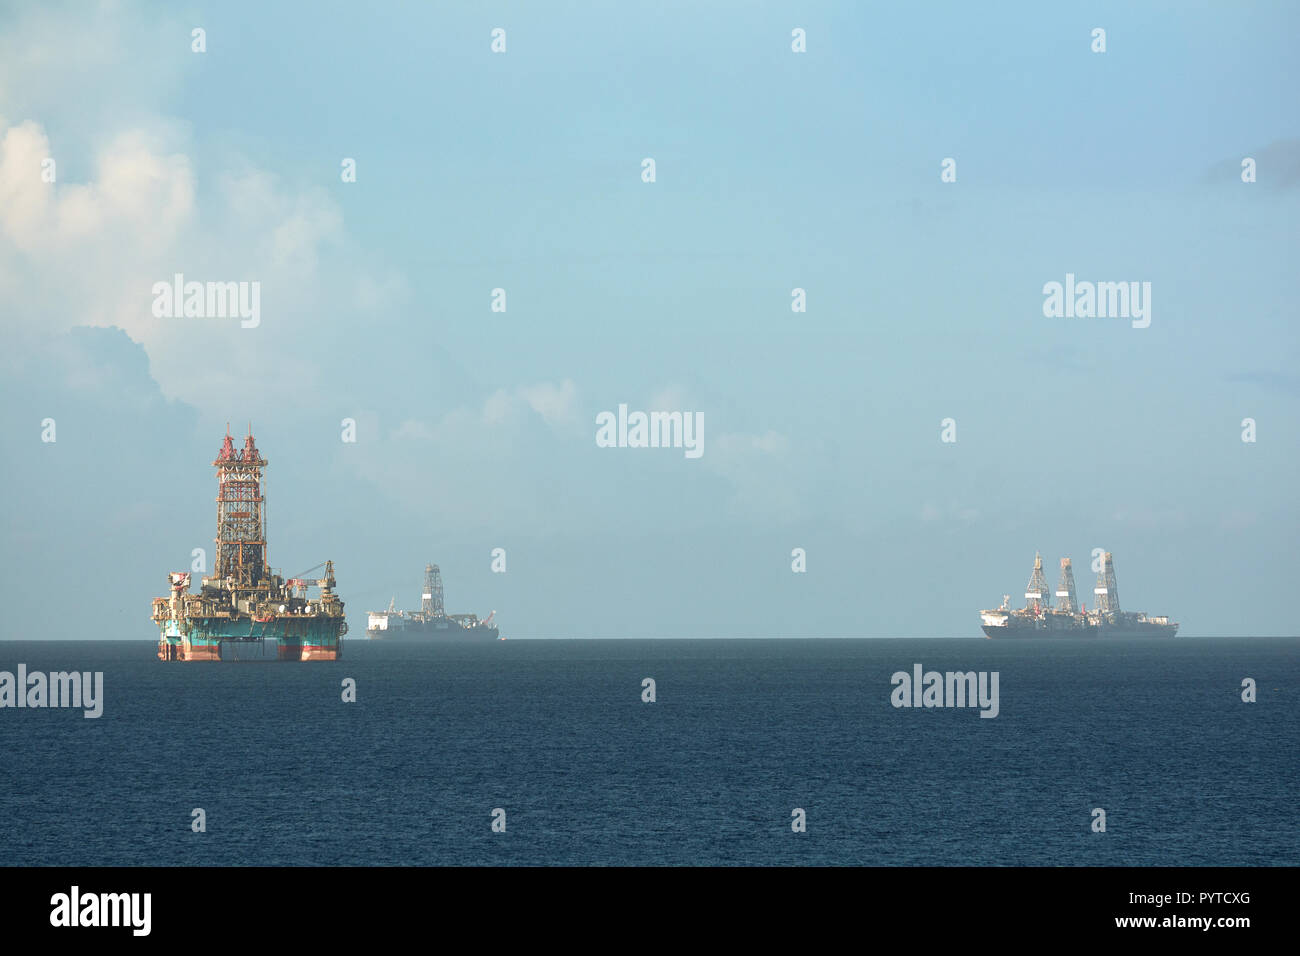 Offshore oil rig and drilling vessels in Chaguaramas Bay, Trinidad and Tobago working on oil industry project at sea. Stock Photo